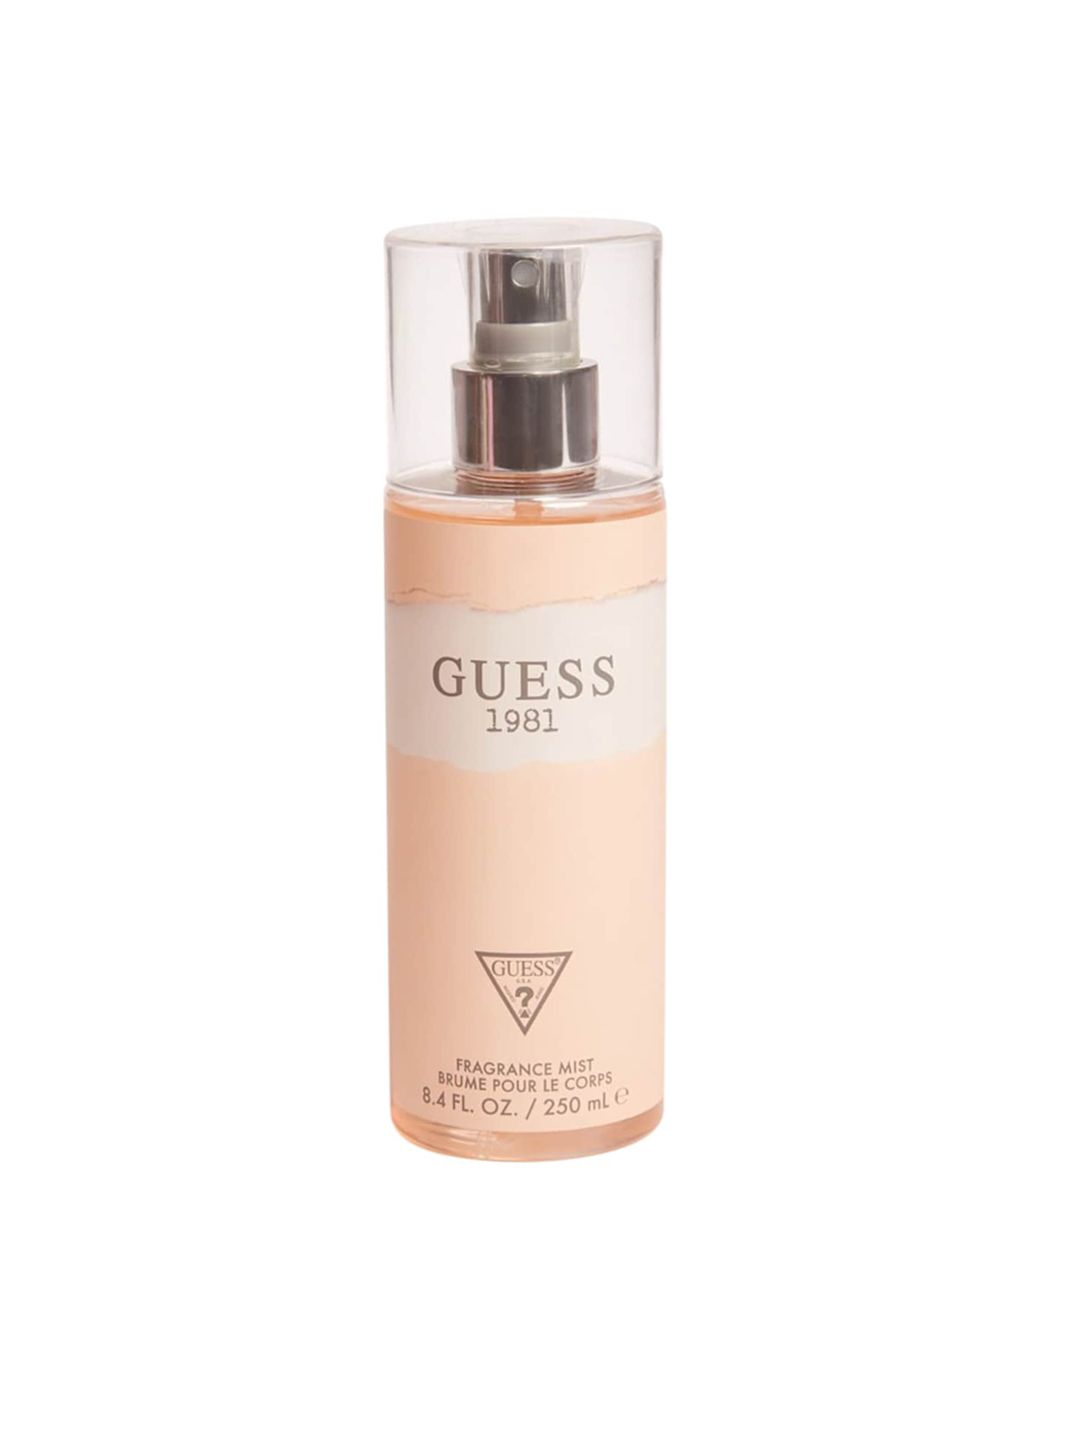 GUESS Women 1981 Body Mist 250ml Price in India